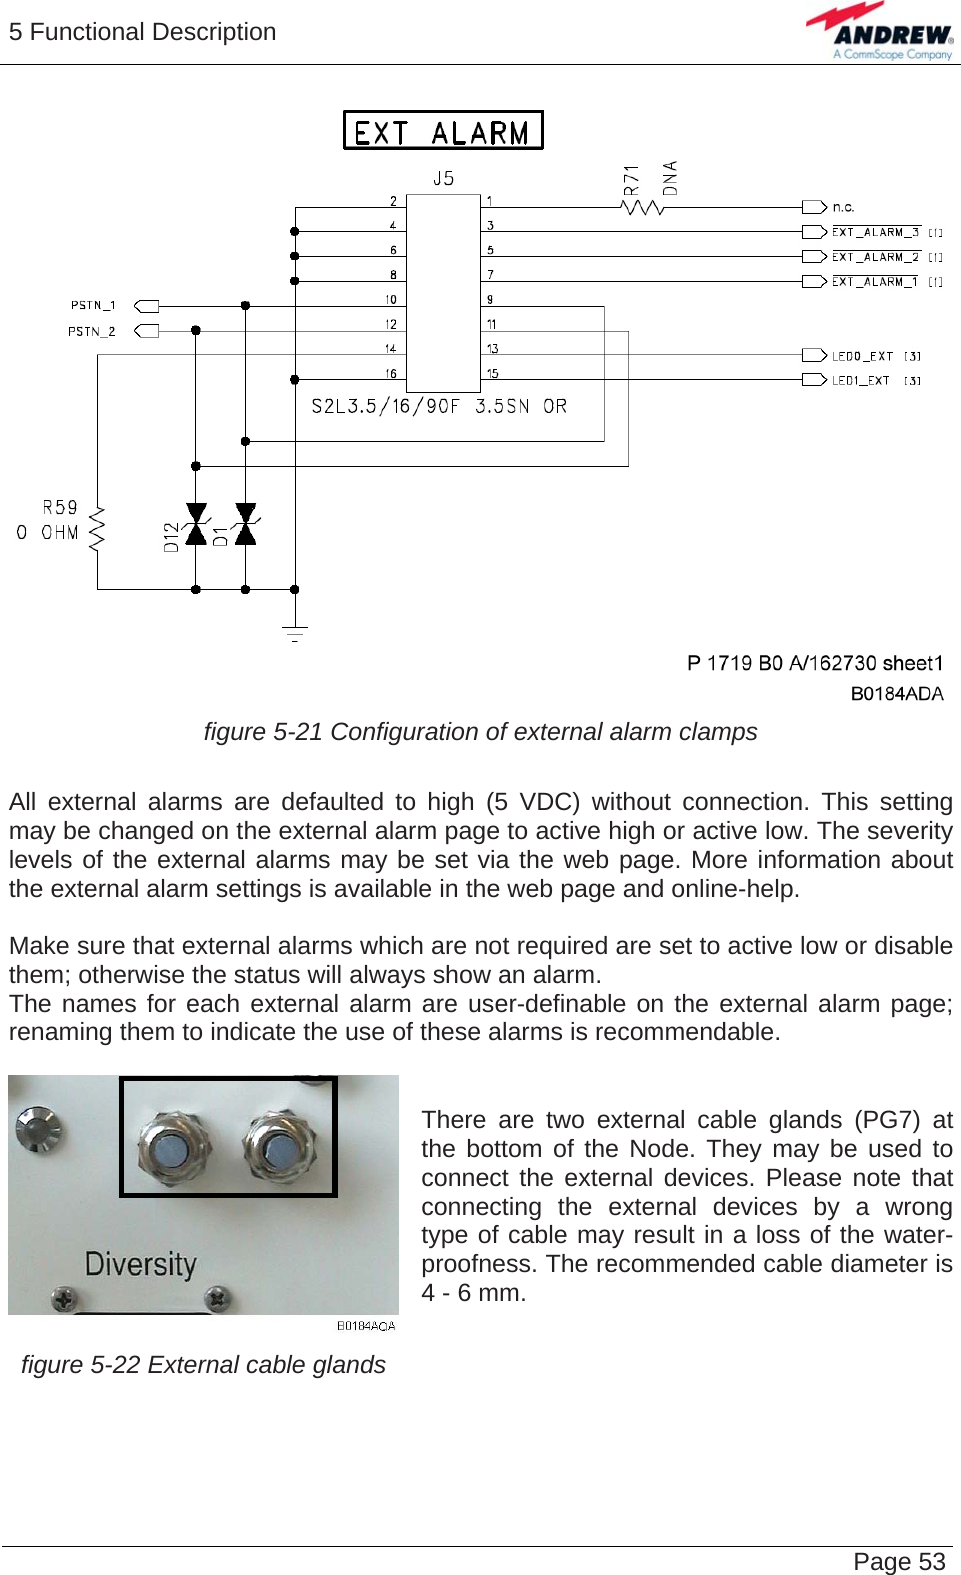 5 Functional Description   Page 53 figure 5-21 Configuration of external alarm clamps  All external alarms are defaulted to high (5 VDC) without connection. This setting may be changed on the external alarm page to active high or active low. The severity levels of the external alarms may be set via the web page. More information about the external alarm settings is available in the web page and online-help.  Make sure that external alarms which are not required are set to active low or disable them; otherwise the status will always show an alarm. The names for each external alarm are user-definable on the external alarm page; renaming them to indicate the use of these alarms is recommendable.  There are two external cable glands (PG7) at the bottom of the Node. They may be used to connect the external devices. Please note that connecting the external devices by a wrong type of cable may result in a loss of the water-proofness. The recommended cable diameter is 4 - 6 mm. figure 5-22 External cable glands     